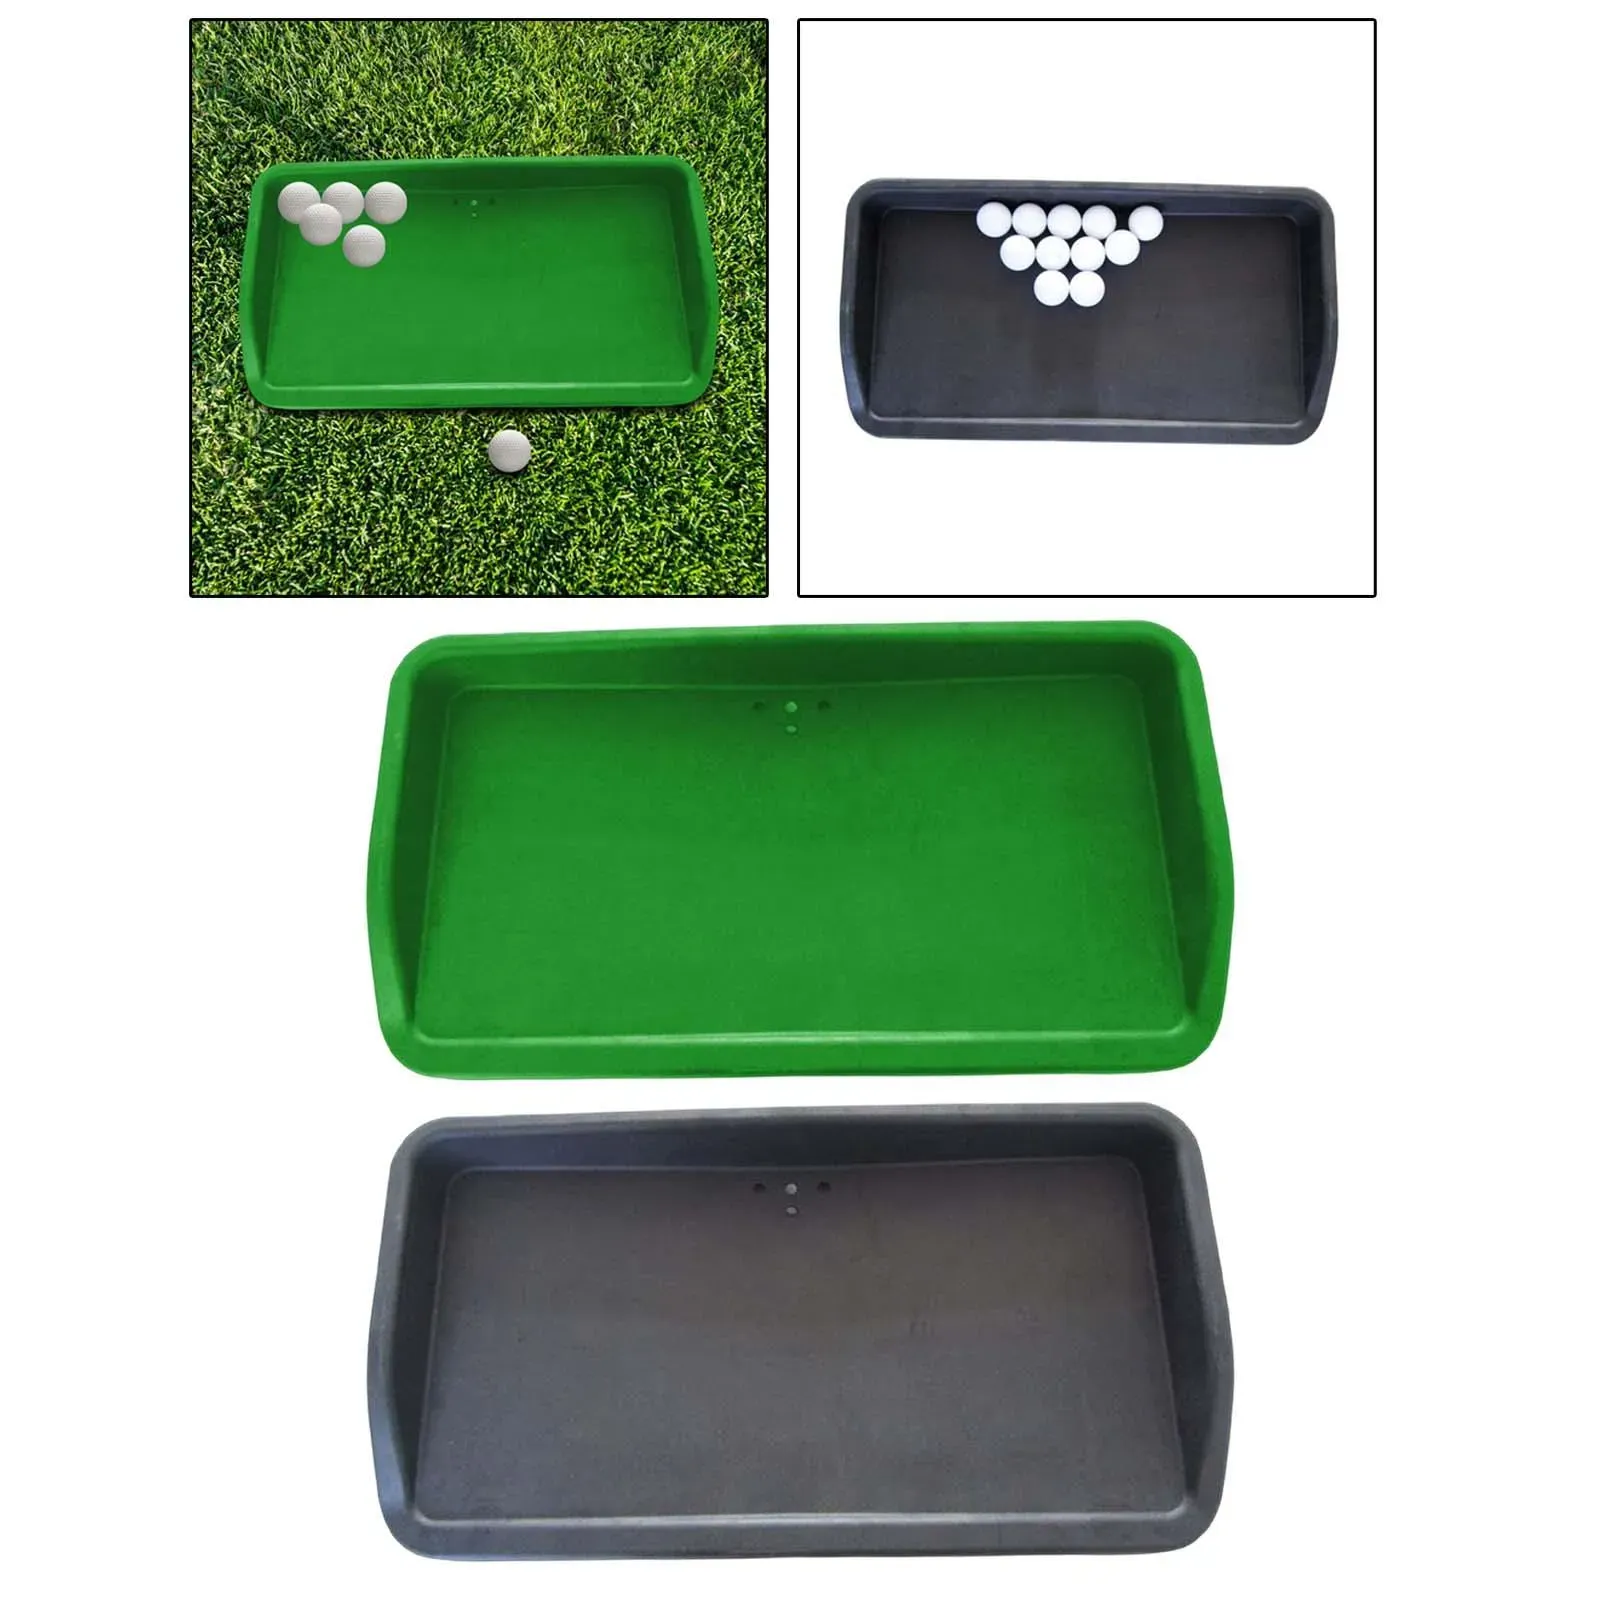 Rubber Golf Ball Tray Practice Aids Golfer Accessory Container Supplies Home